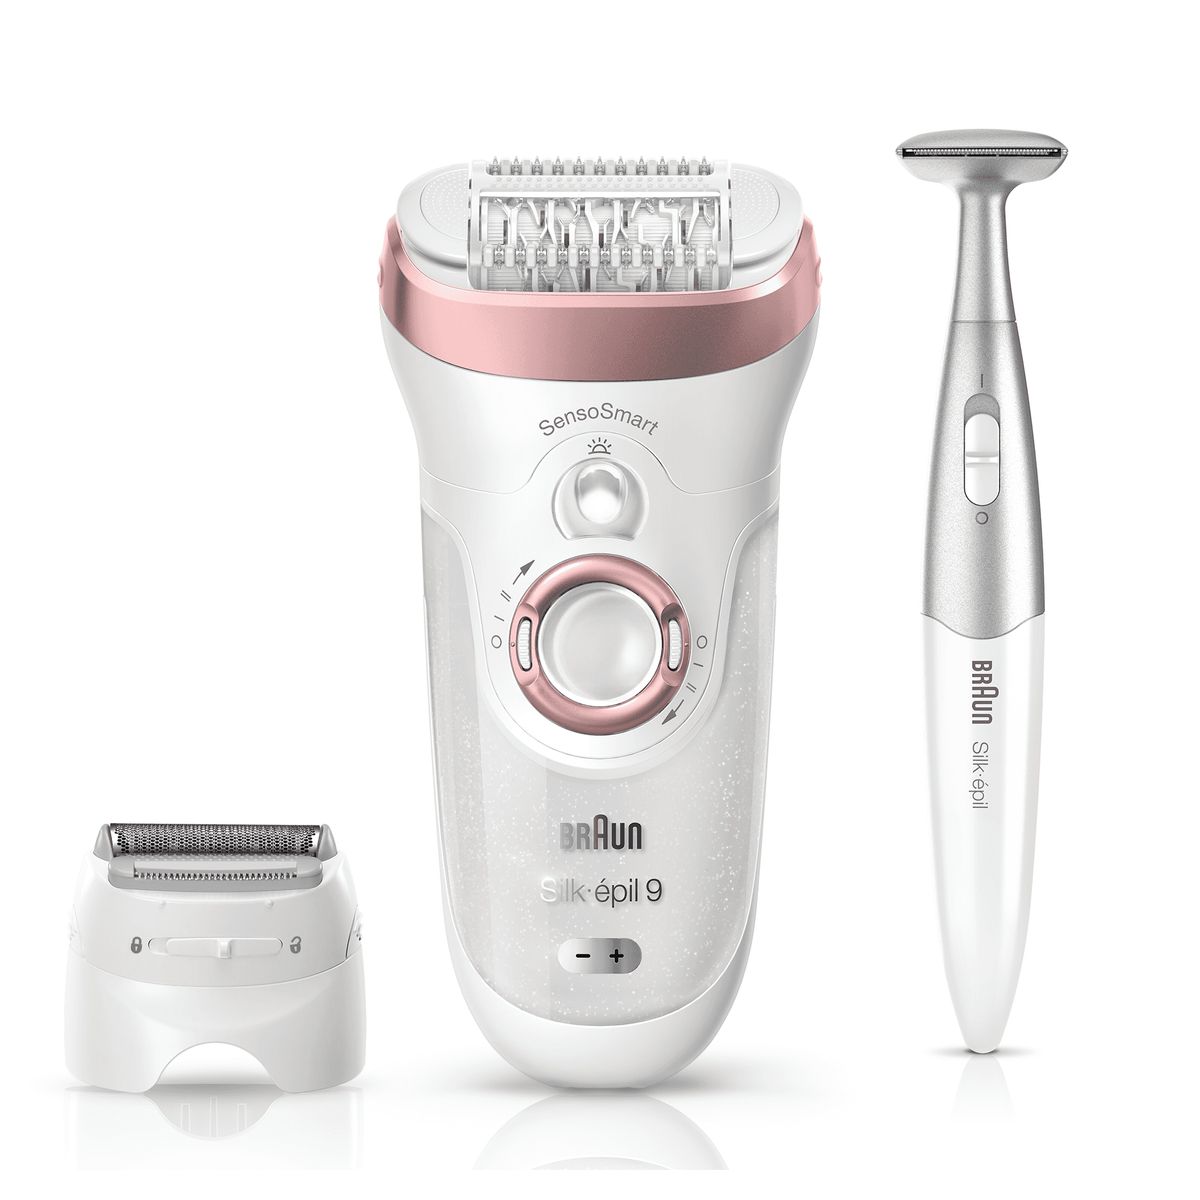 Braun Silk-epil 9-890, epilator for long-lasting hair removal, cordless wet & dry epilator for women, incl. Bikini trimmer and various attachments, white / rose gold